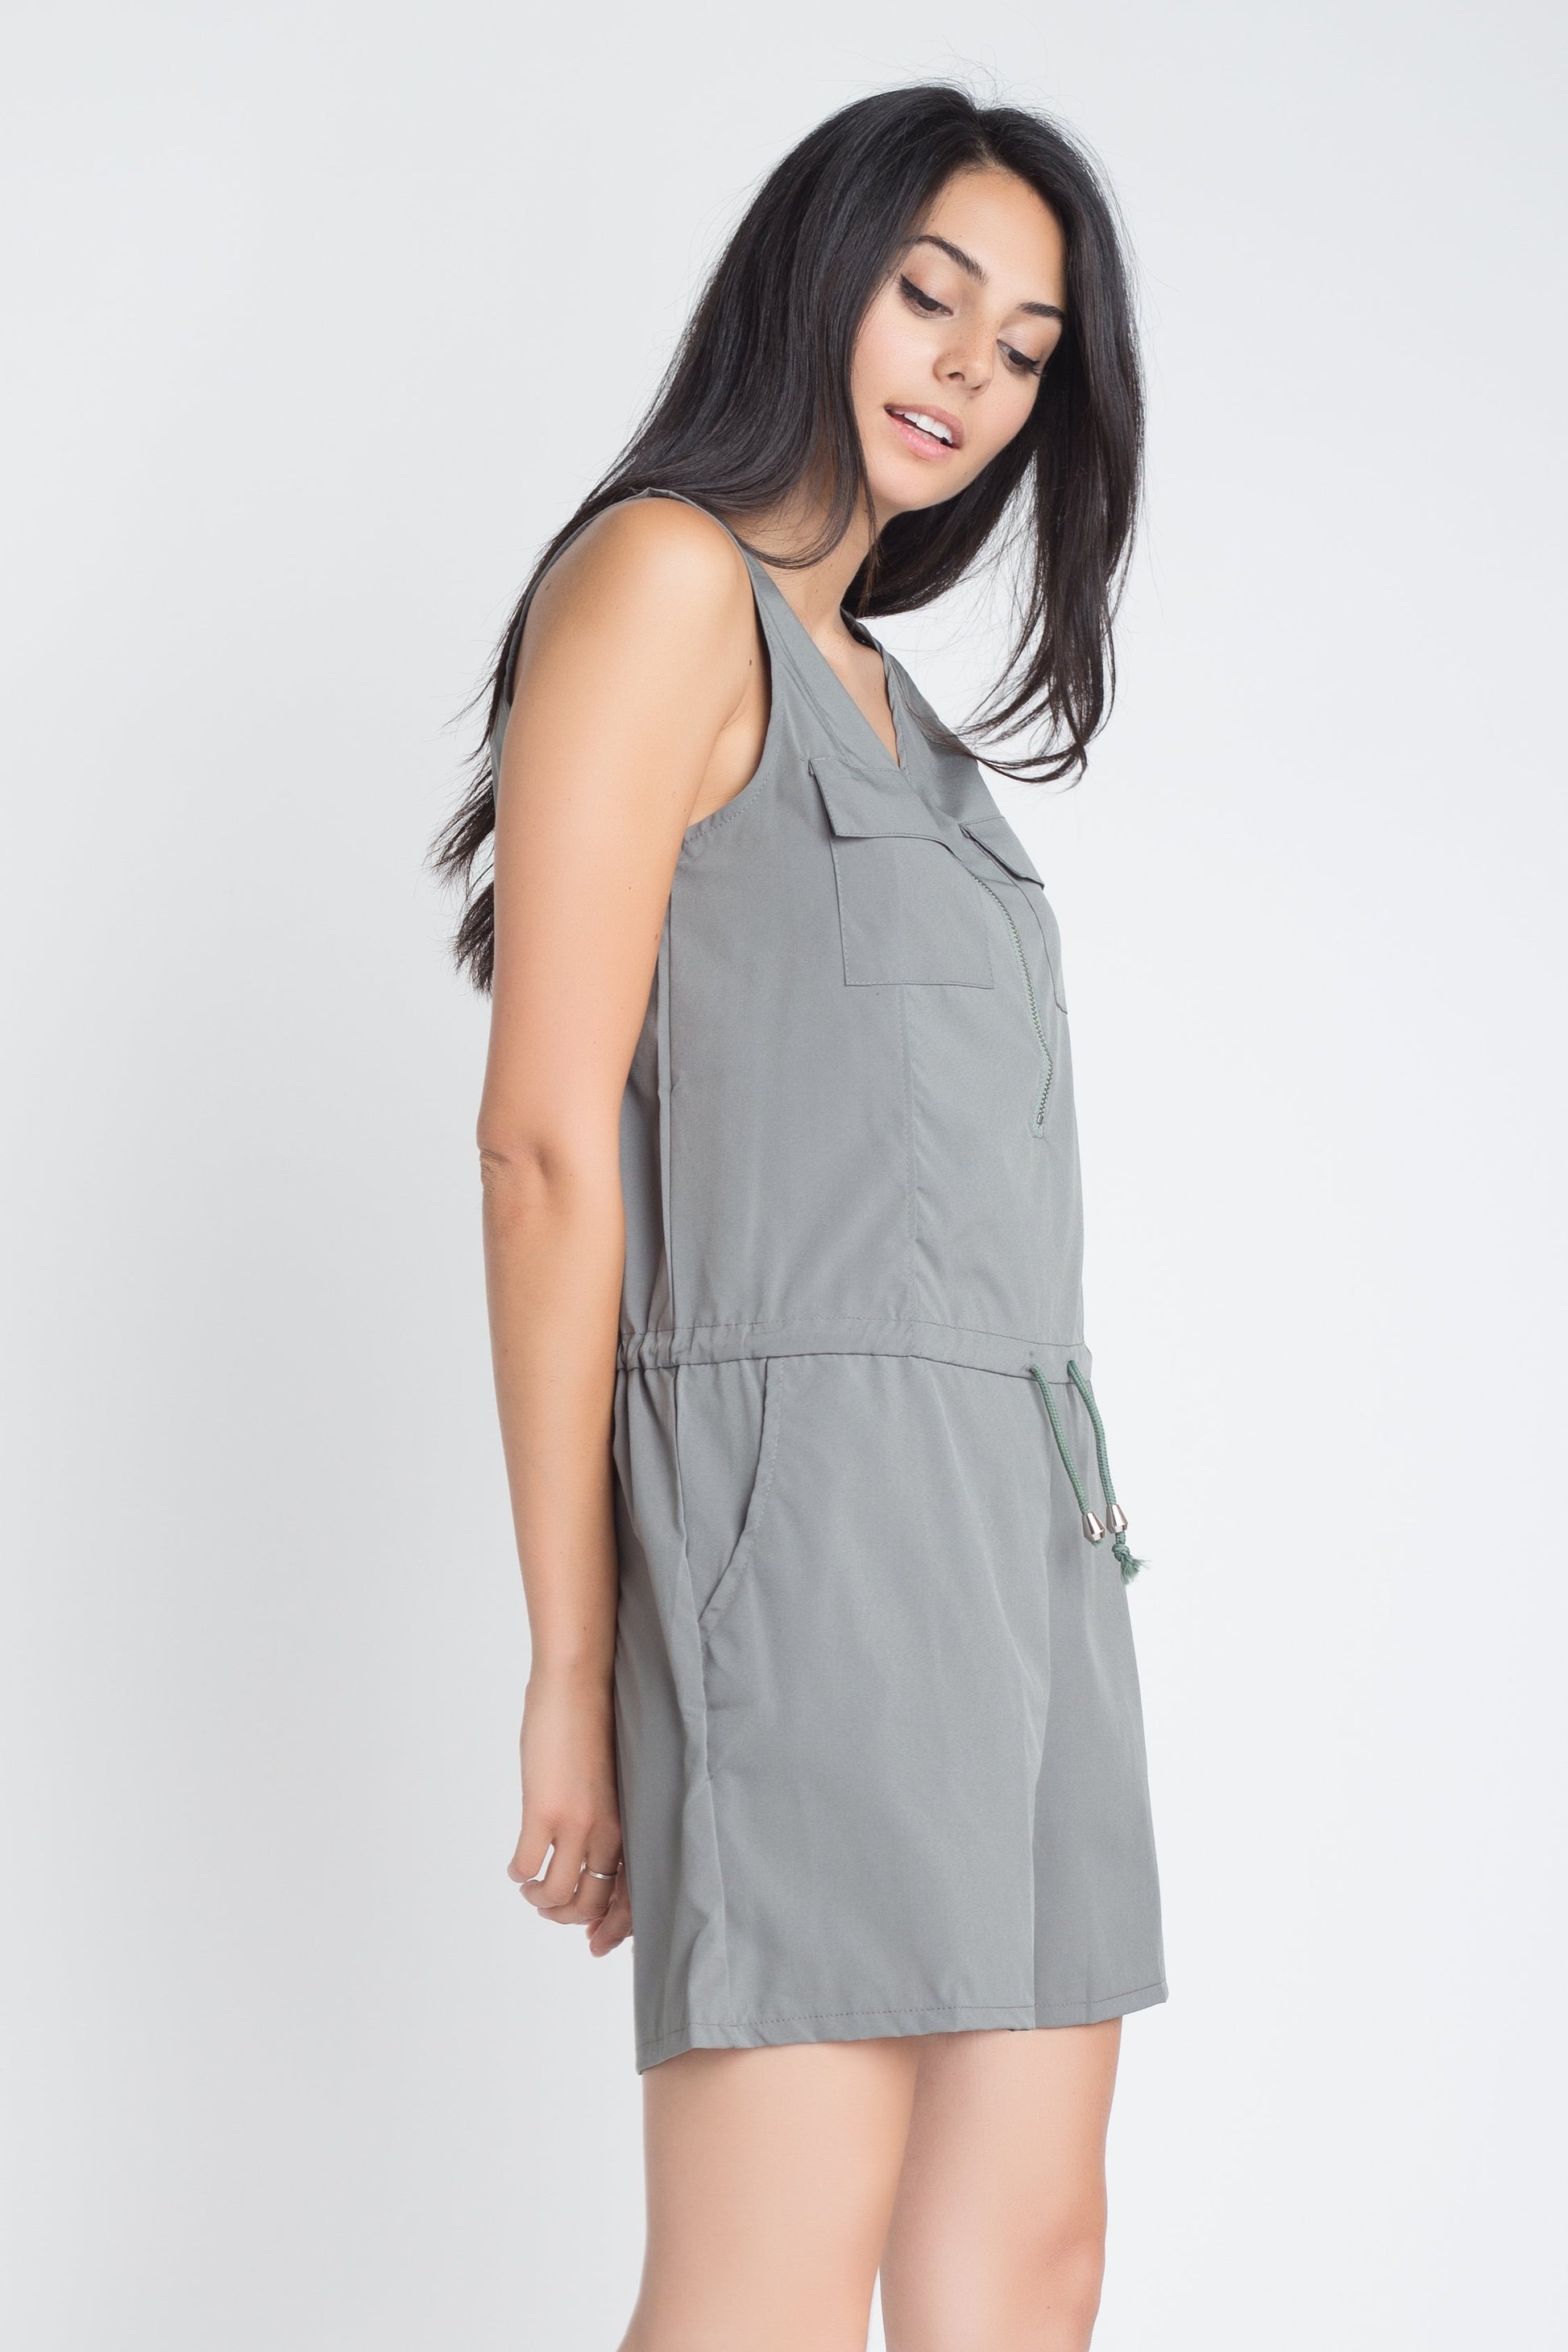 Zip Front Sleeveless Rompers: Sleeveless one-piece outfits with a front zipper closure, offering both style and convenience.